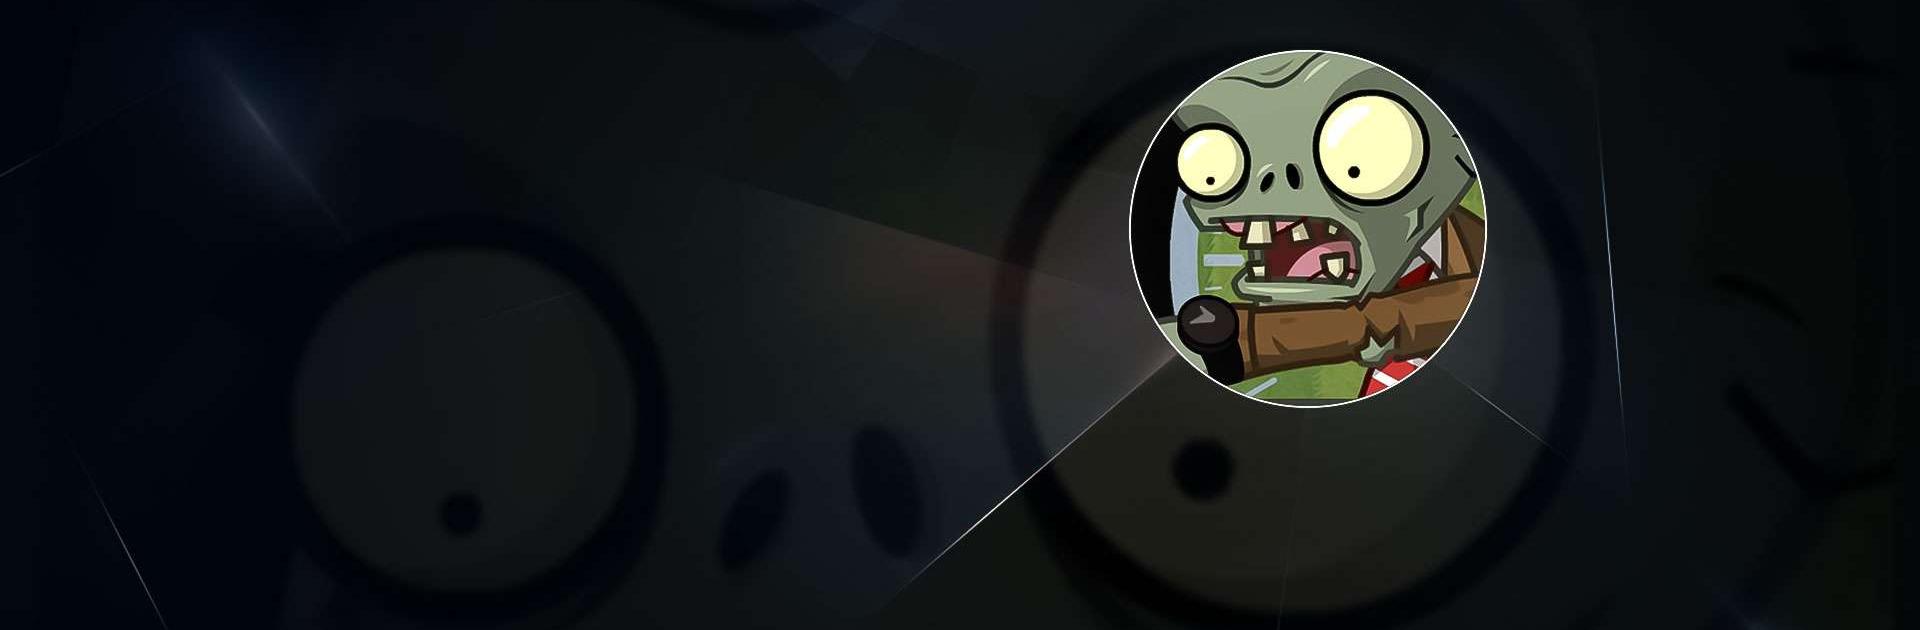 Plants vs. Zombies Watch Face